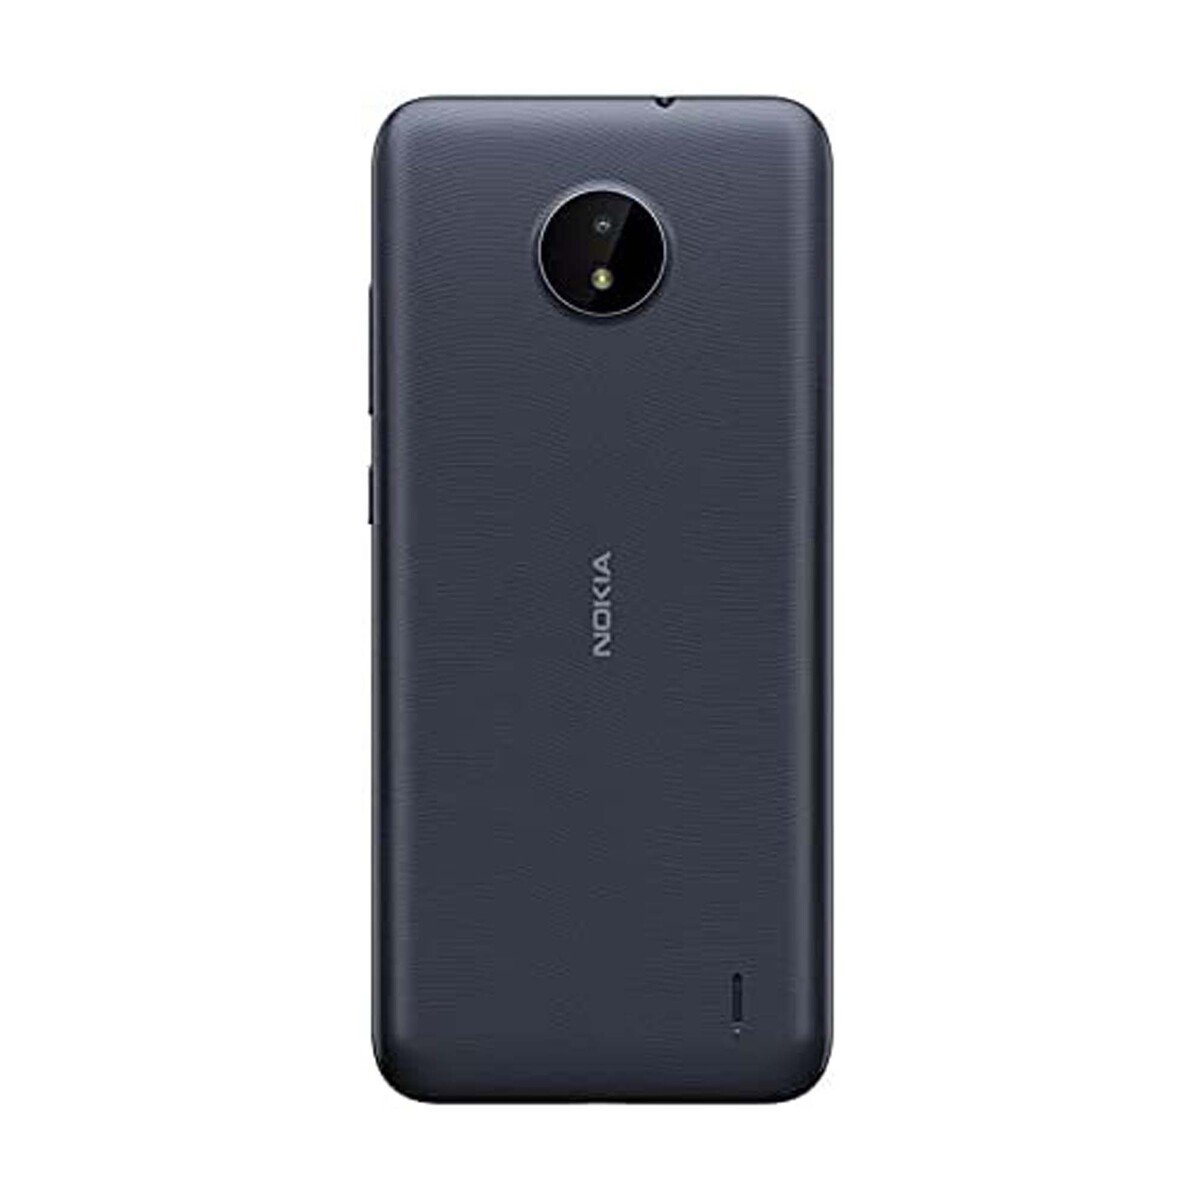 Nokia C20 TA-1352 Android Smartphone,Dual Sim,1 GB RAM,16 GB Memory,6.5"HD+ LCD with V-notch,Android 11, Blue